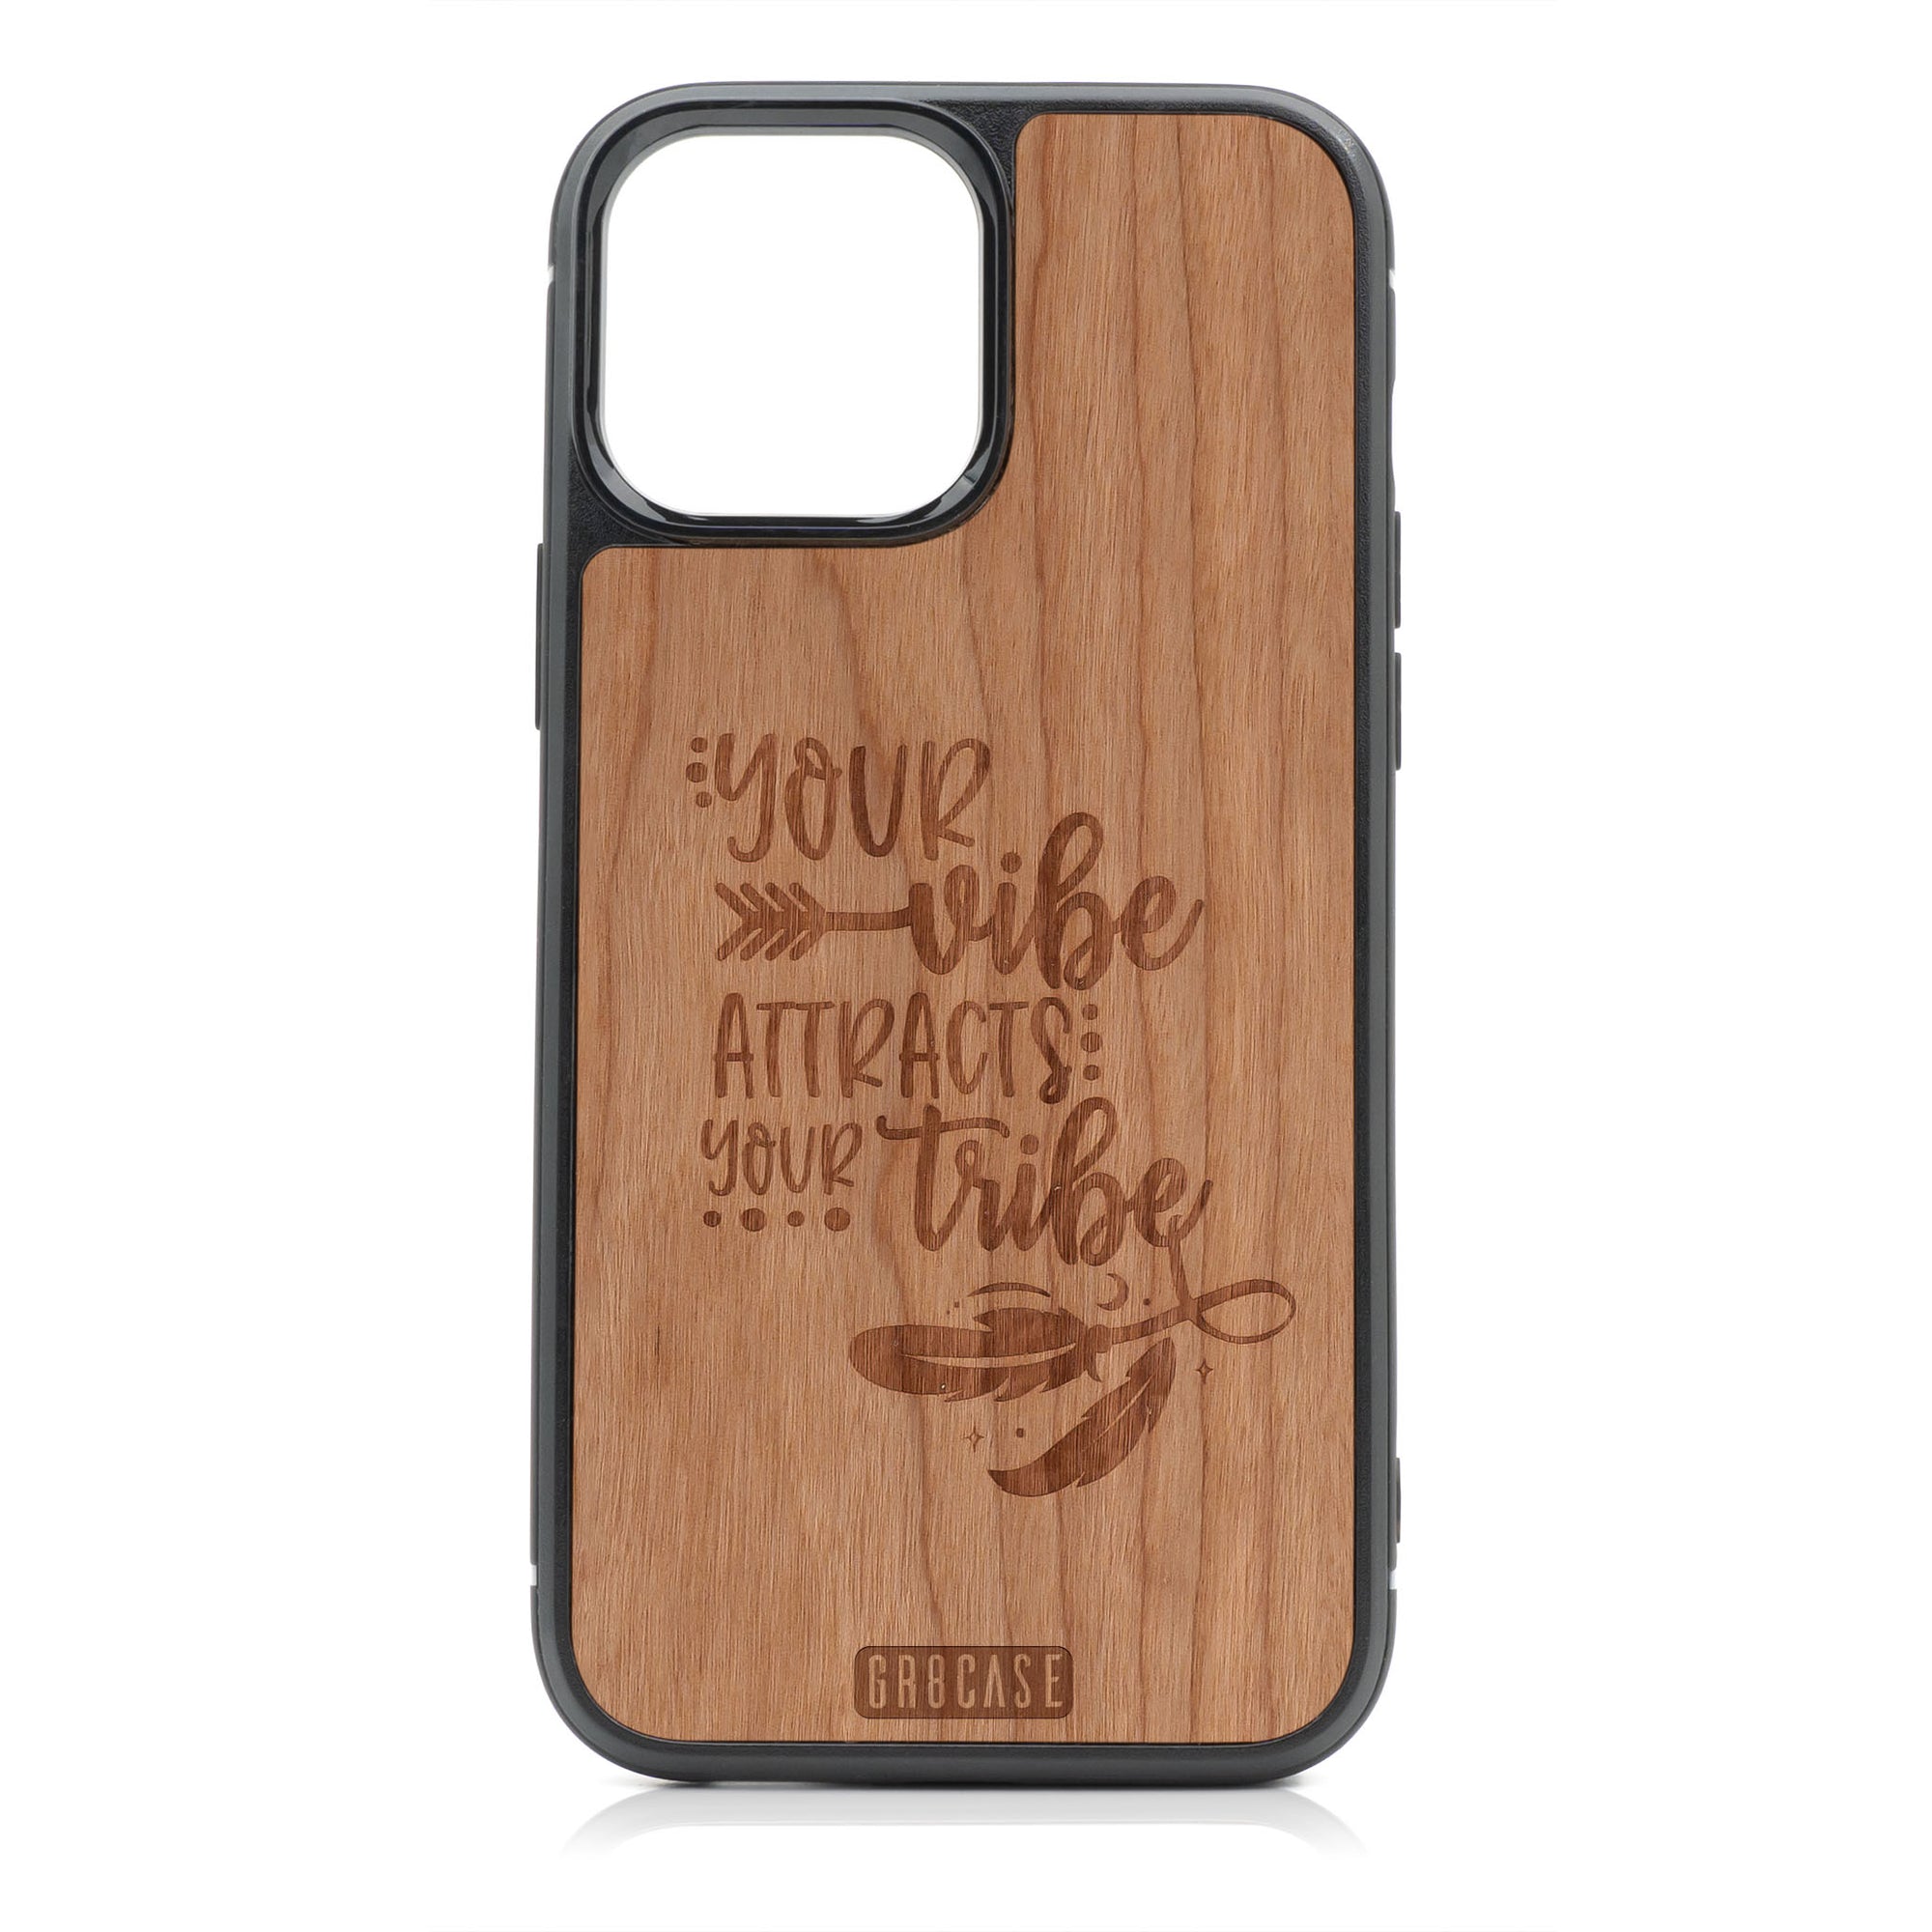 Your Vibe Attracts Your Tribe Design Wood Case For iPhone 13 Pro Max